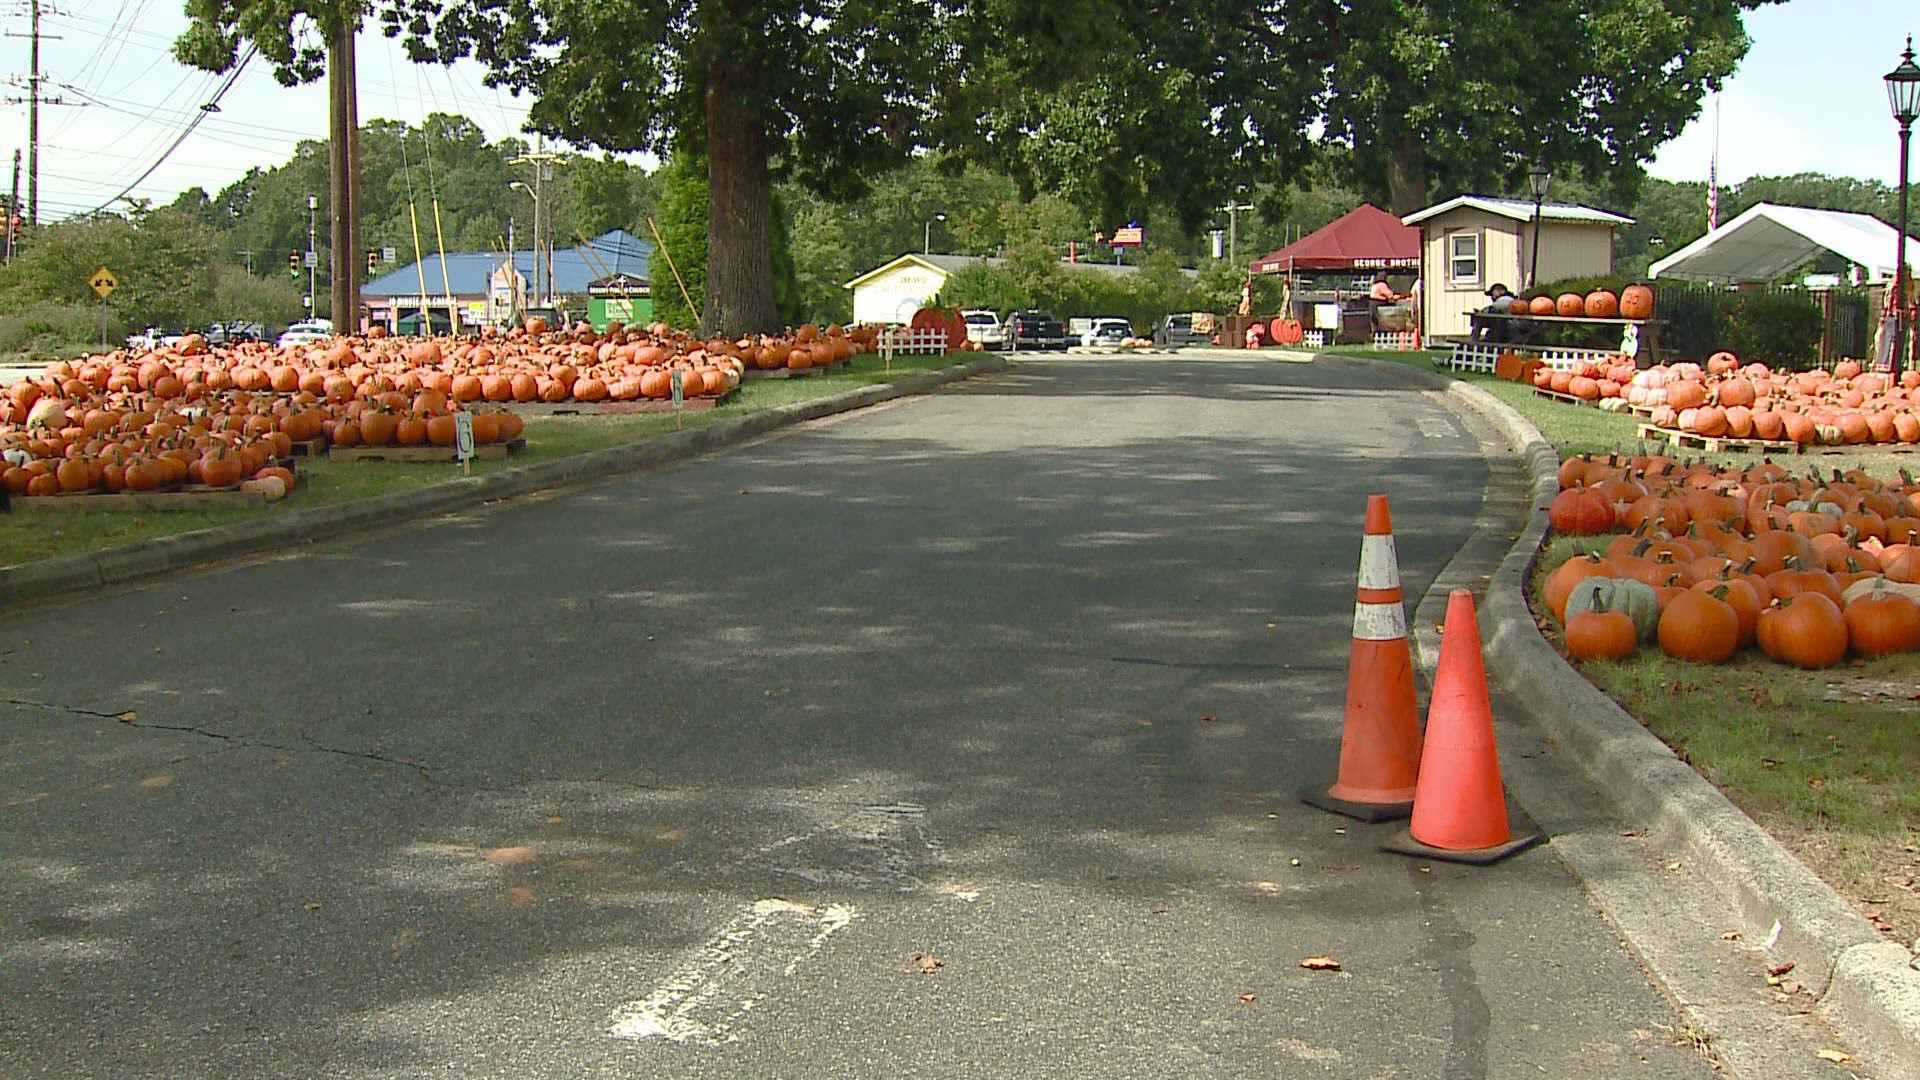 Mount Pisgah Church in Greensboro has been selling pumpkins during fall for 30 years! But this year, they’re doing things differently because of the pandemic.